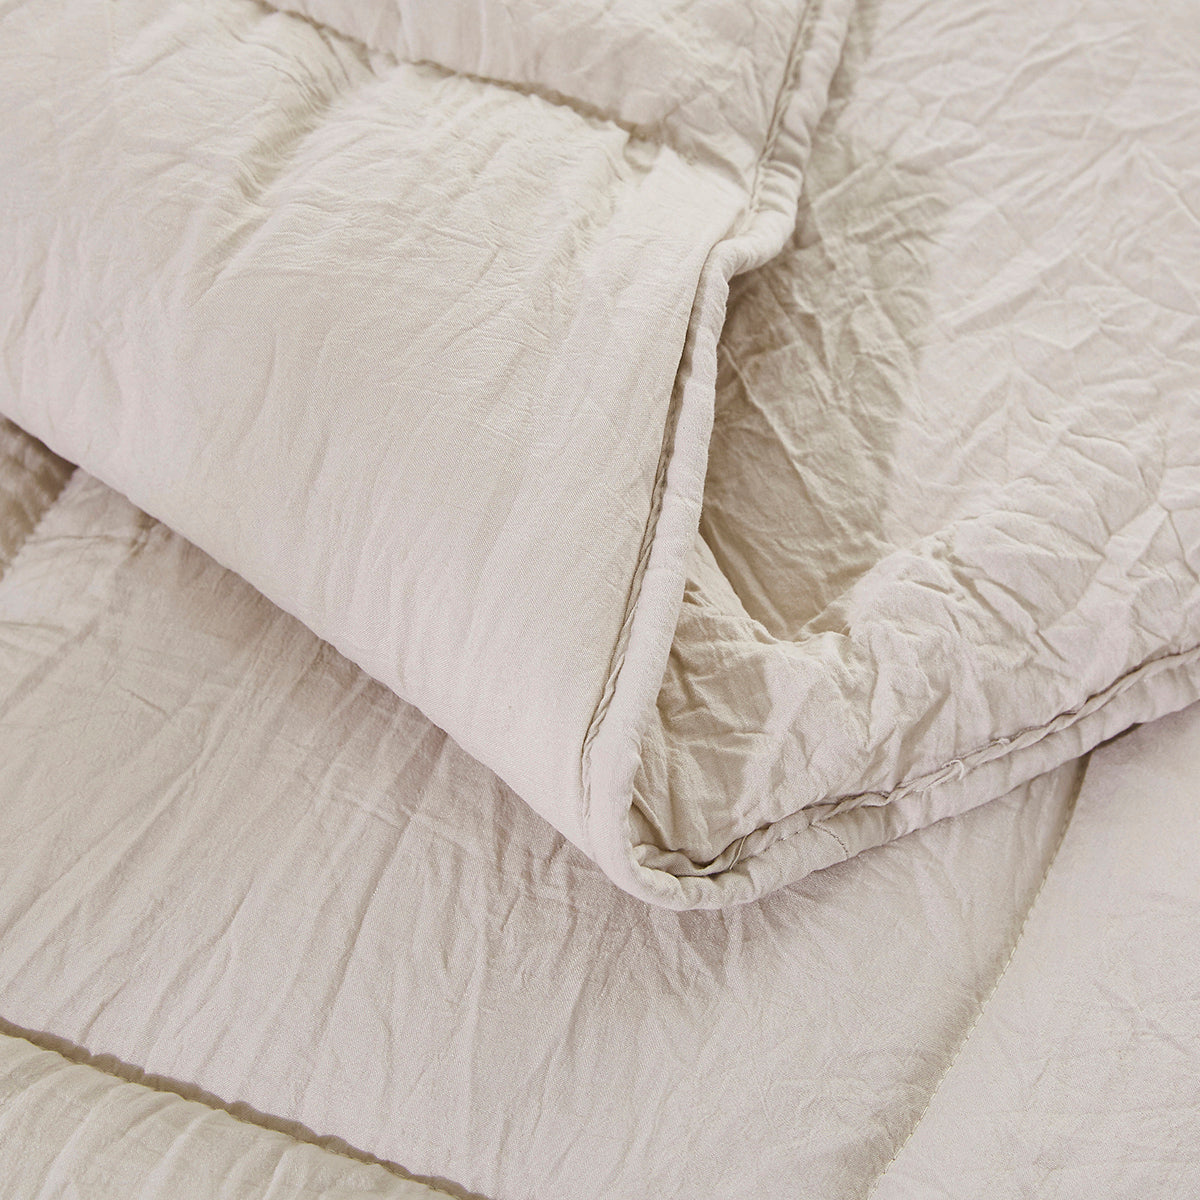 ALTERNATIVE DOWN 3PC COMFORTER. PERFECT FOR ANY SEASON. ULTRA SOFT MICROFIBER COVER. TAUPE